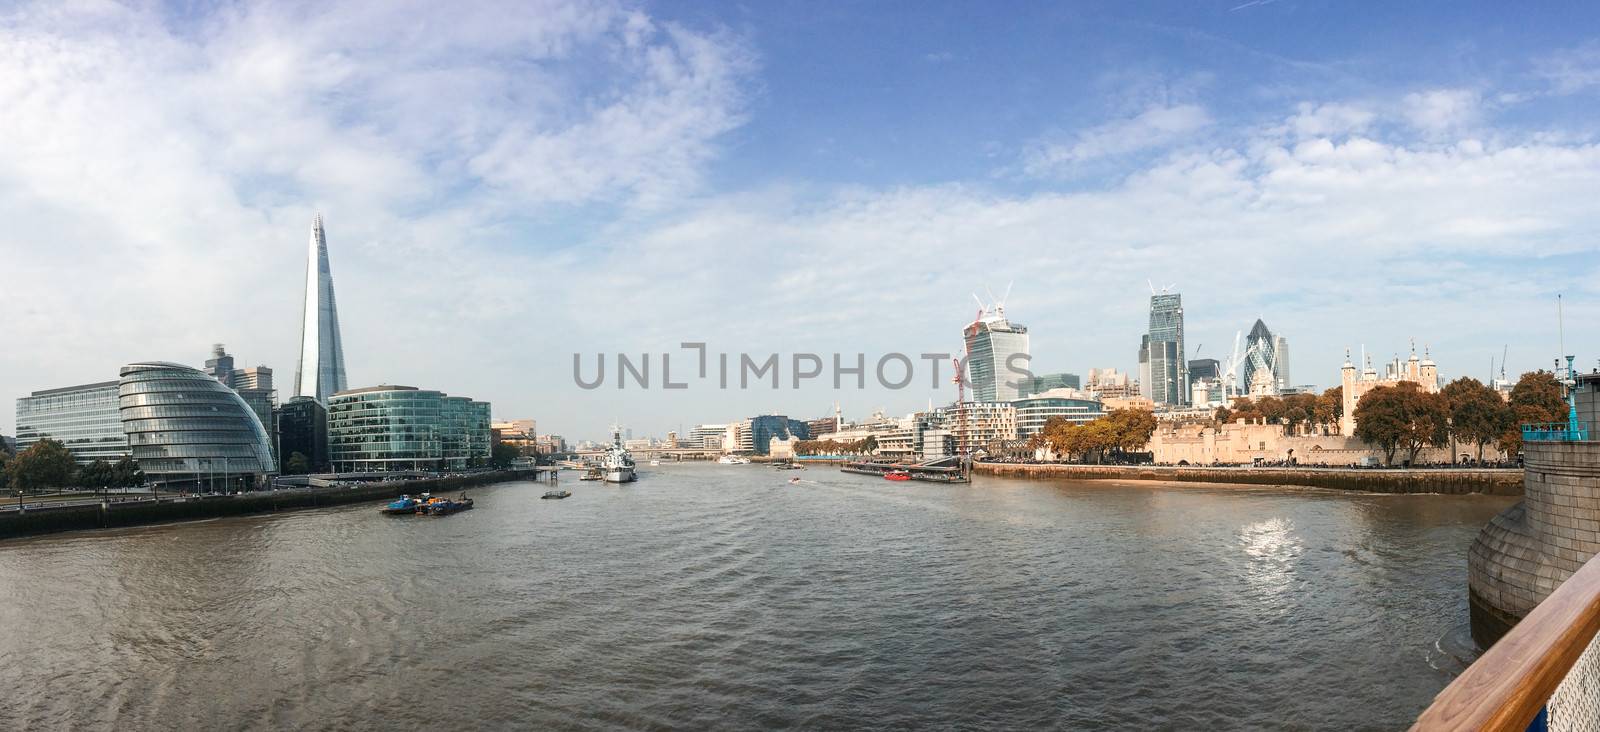 London, UK. Panoramic city view on river Thames.